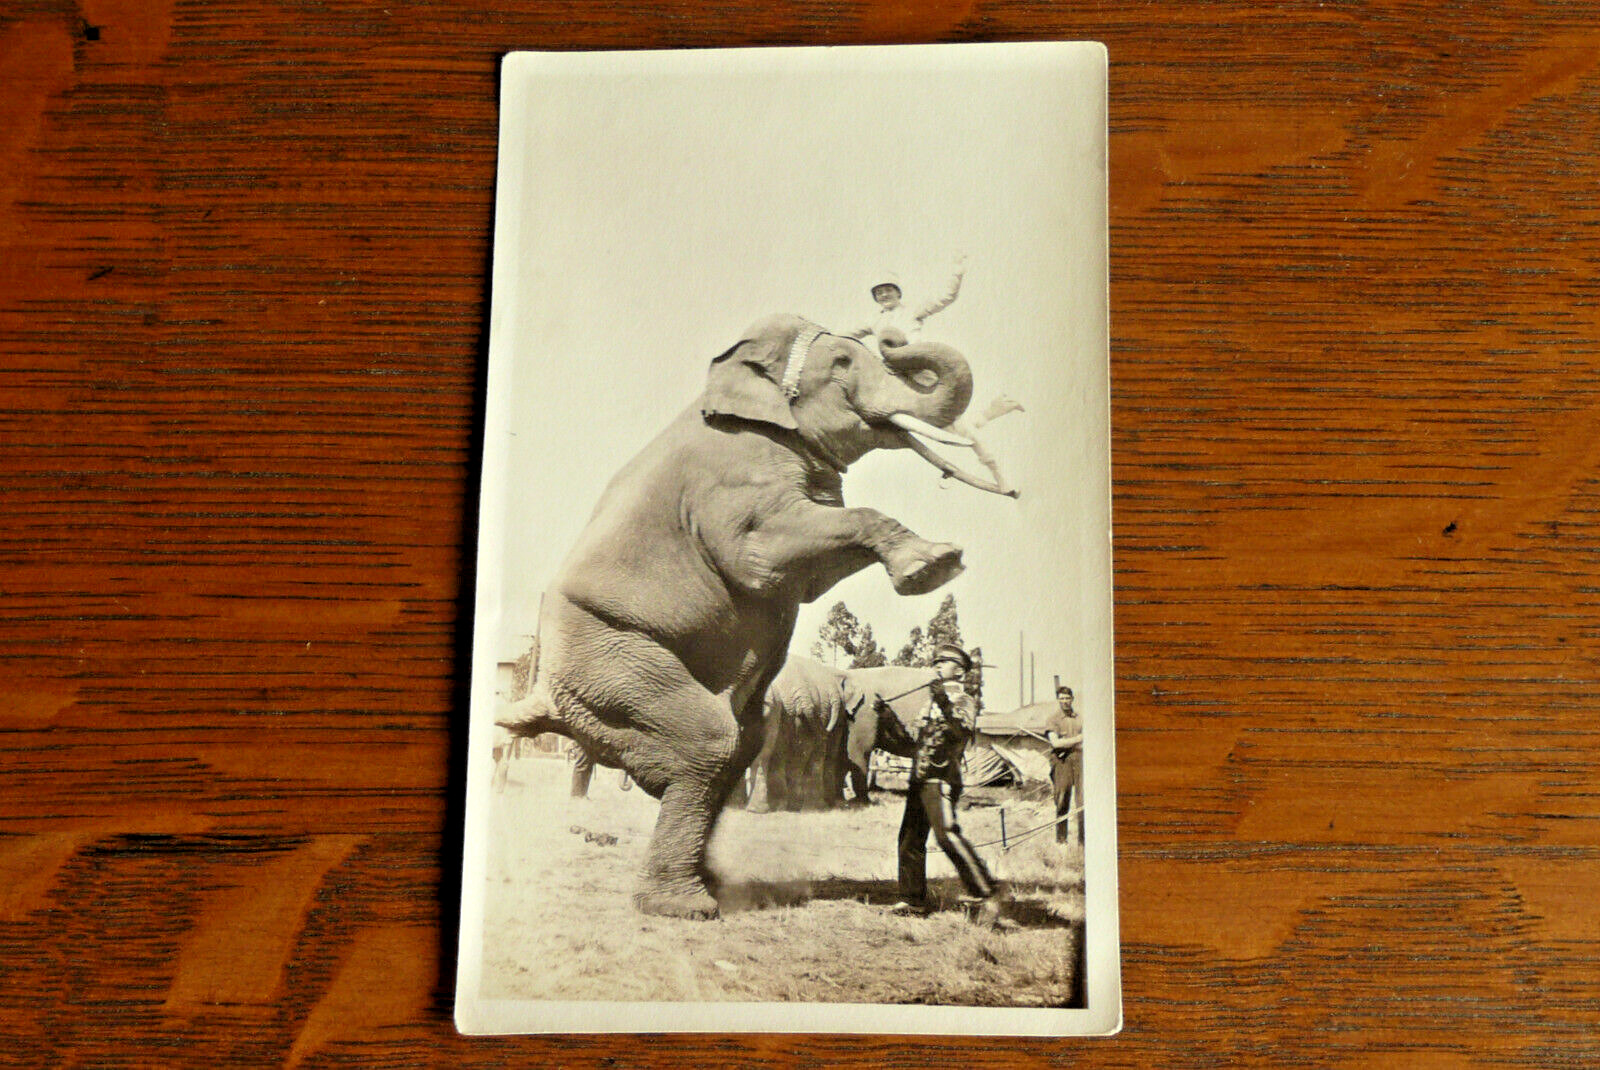 Antique Vintage Photo Someone Up High On Circus / Carnival Elephant Tusk Posing